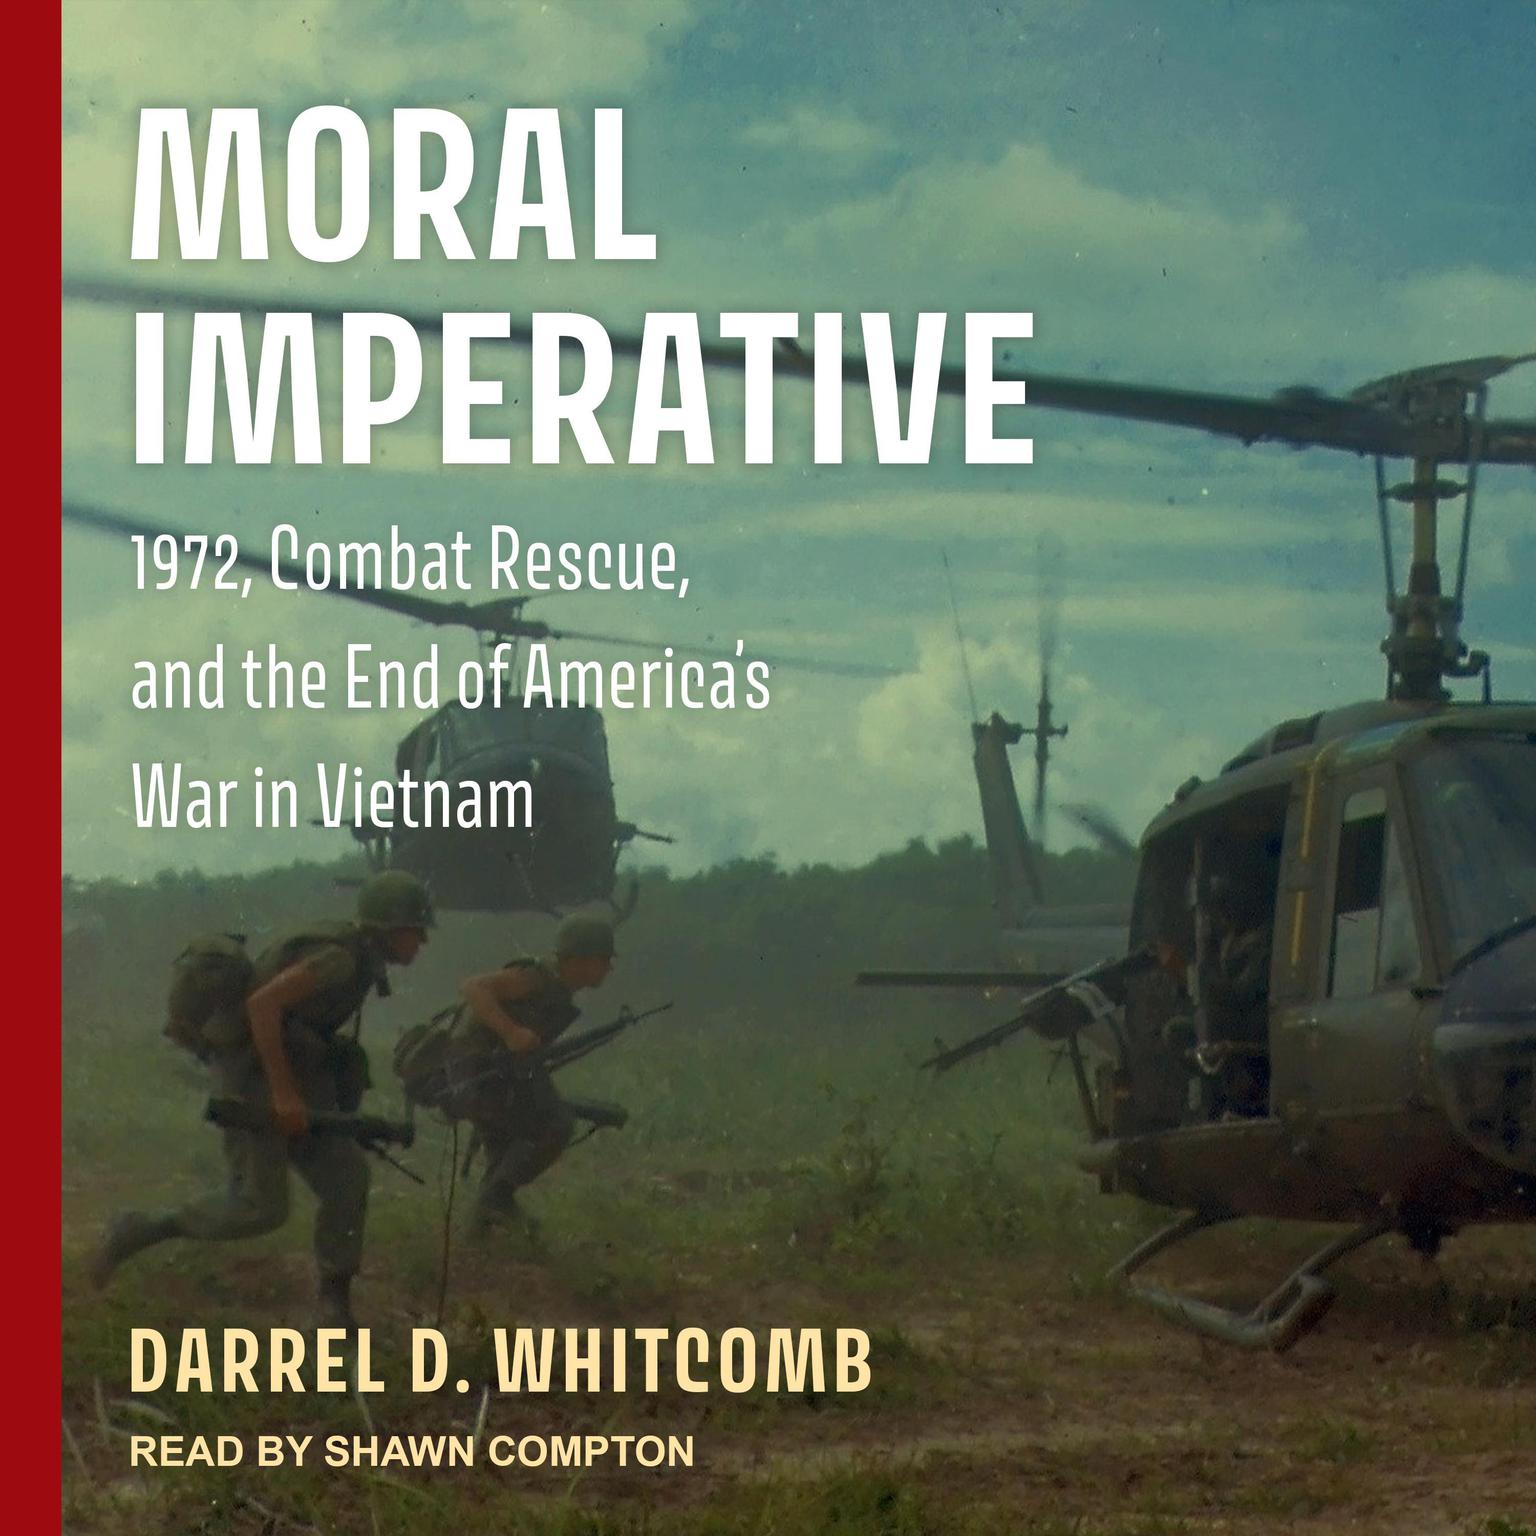 Moral Imperative: 1972, Combat Rescue, and the End of Americas War in Vietnam Audiobook, by Darrel D. Whitcomb